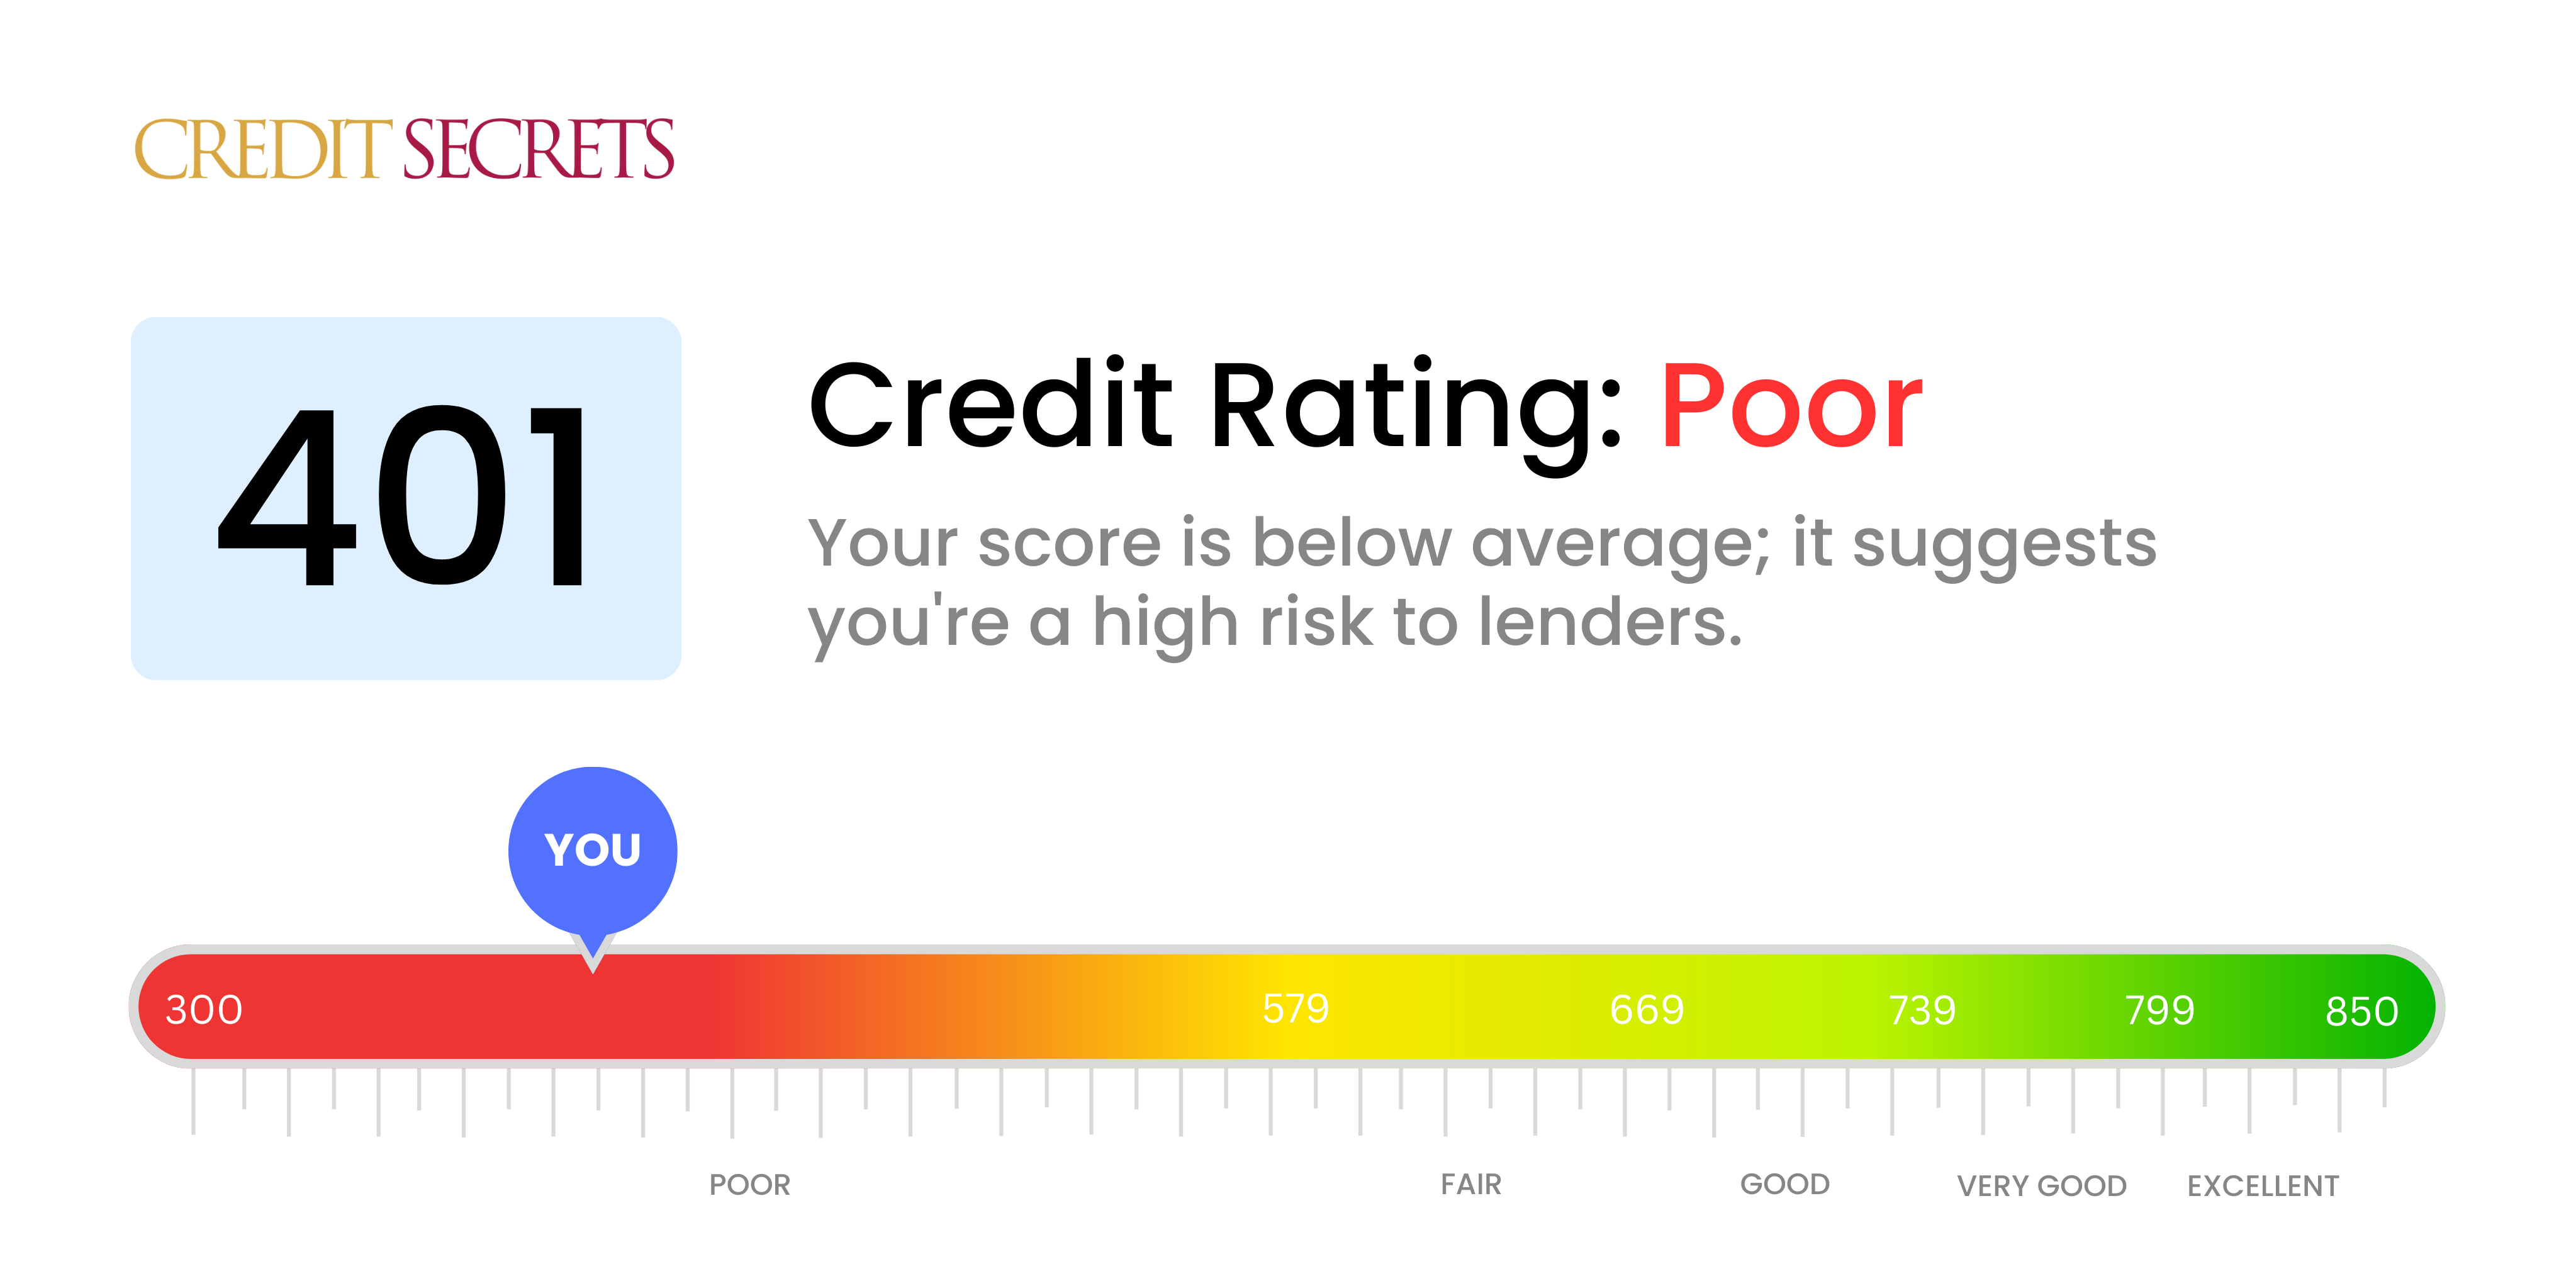 Is 401 a good credit score?